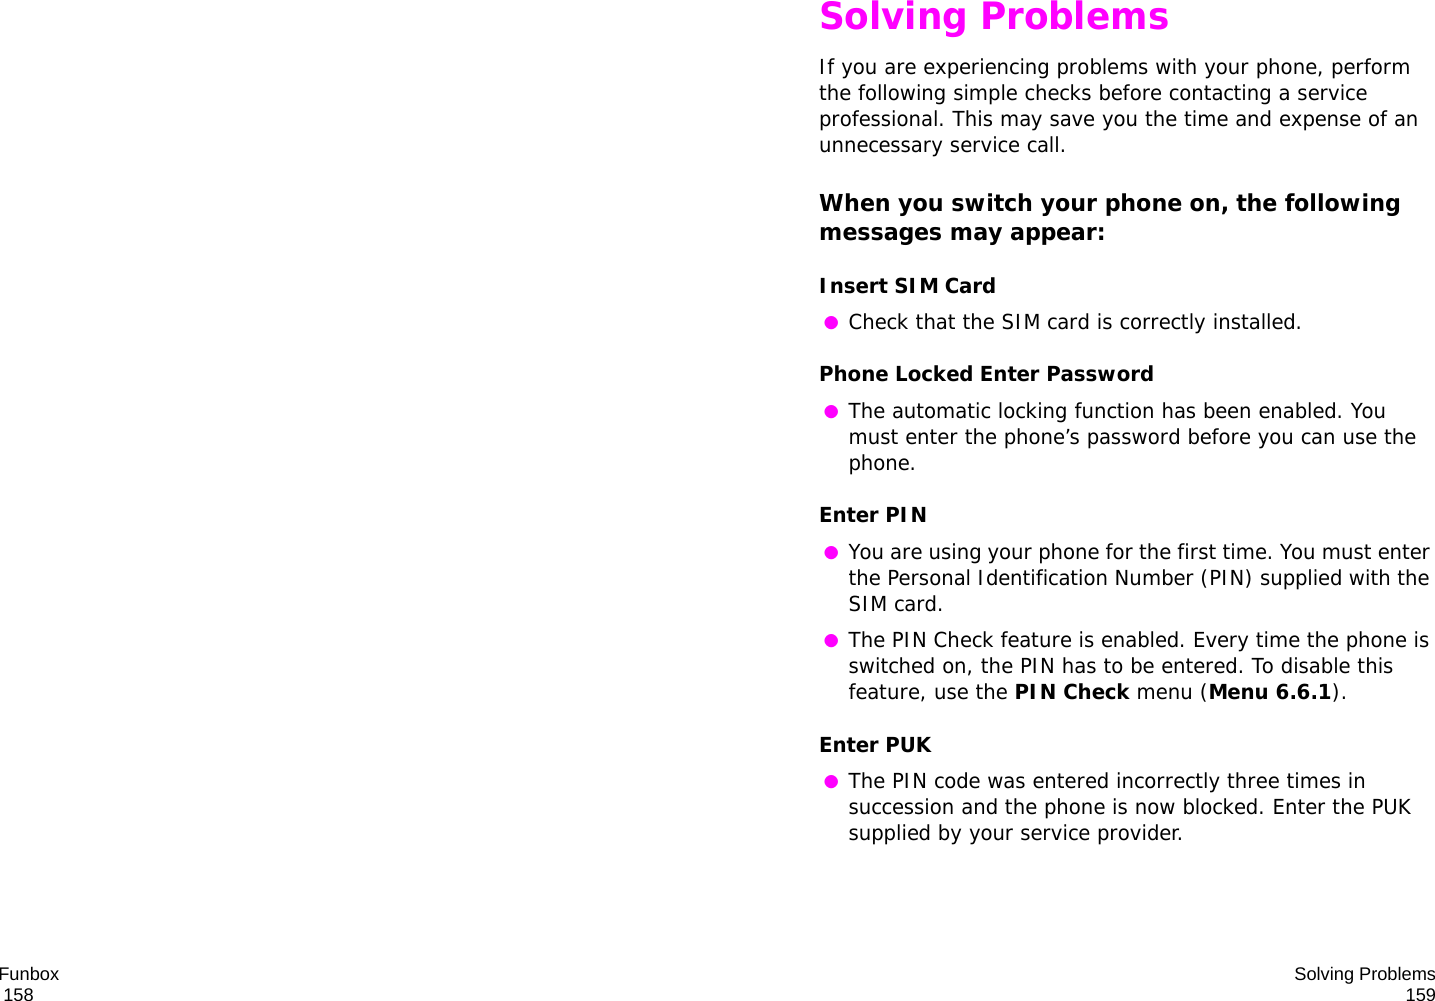 Funbox                                                                                       158 Solving Problems159Solving ProblemsIf you are experiencing problems with your phone, perform the following simple checks before contacting a service professional. This may save you the time and expense of an unnecessary service call.When you switch your phone on, the following messages may appear:Insert SIM Card ●Check that the SIM card is correctly installed.Phone Locked Enter Password ●The automatic locking function has been enabled. You must enter the phone’s password before you can use the phone.Enter PIN ●You are using your phone for the first time. You must enter the Personal Identification Number (PIN) supplied with the SIM card. ●The PIN Check feature is enabled. Every time the phone is switched on, the PIN has to be entered. To disable this feature, use the PIN Check menu (Menu 6.6.1).Enter PUK ●The PIN code was entered incorrectly three times in succession and the phone is now blocked. Enter the PUK supplied by your service provider.